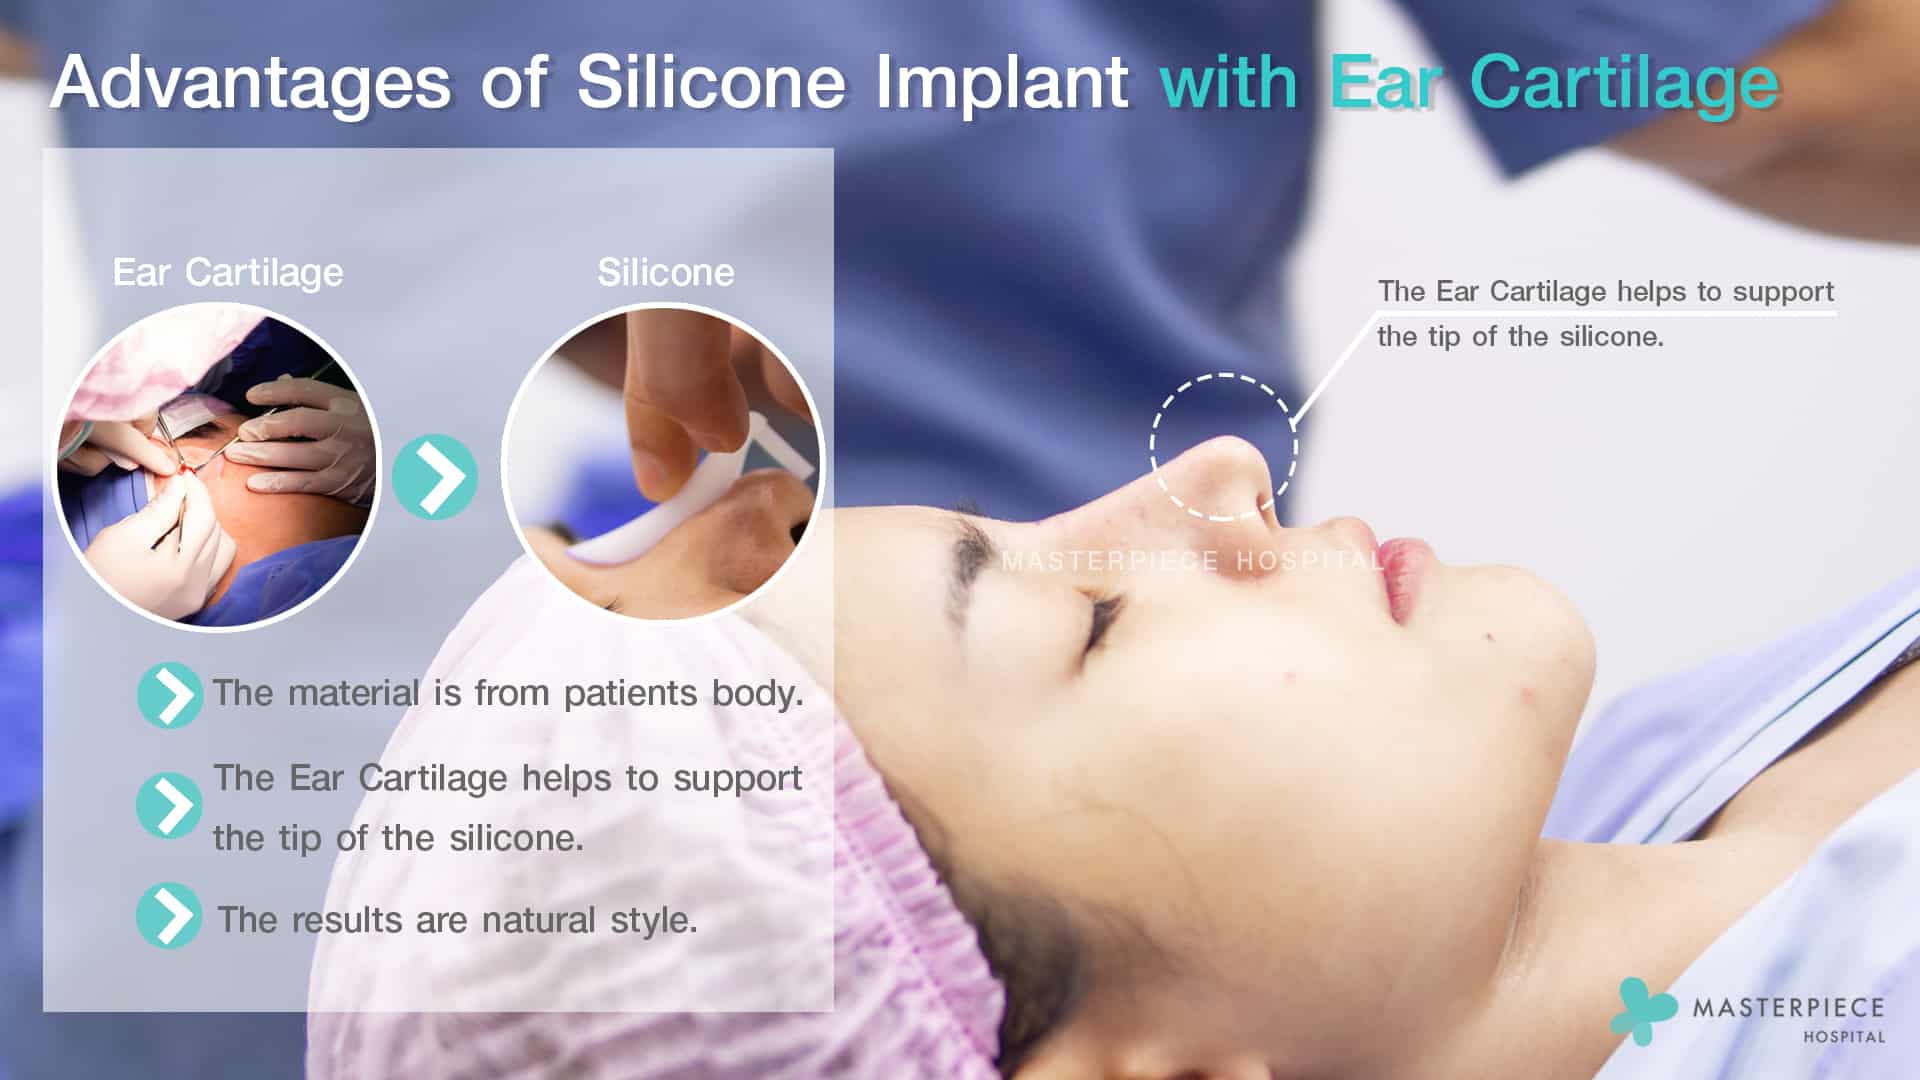 Advantages of Silicone Implant with Ear Cartilage